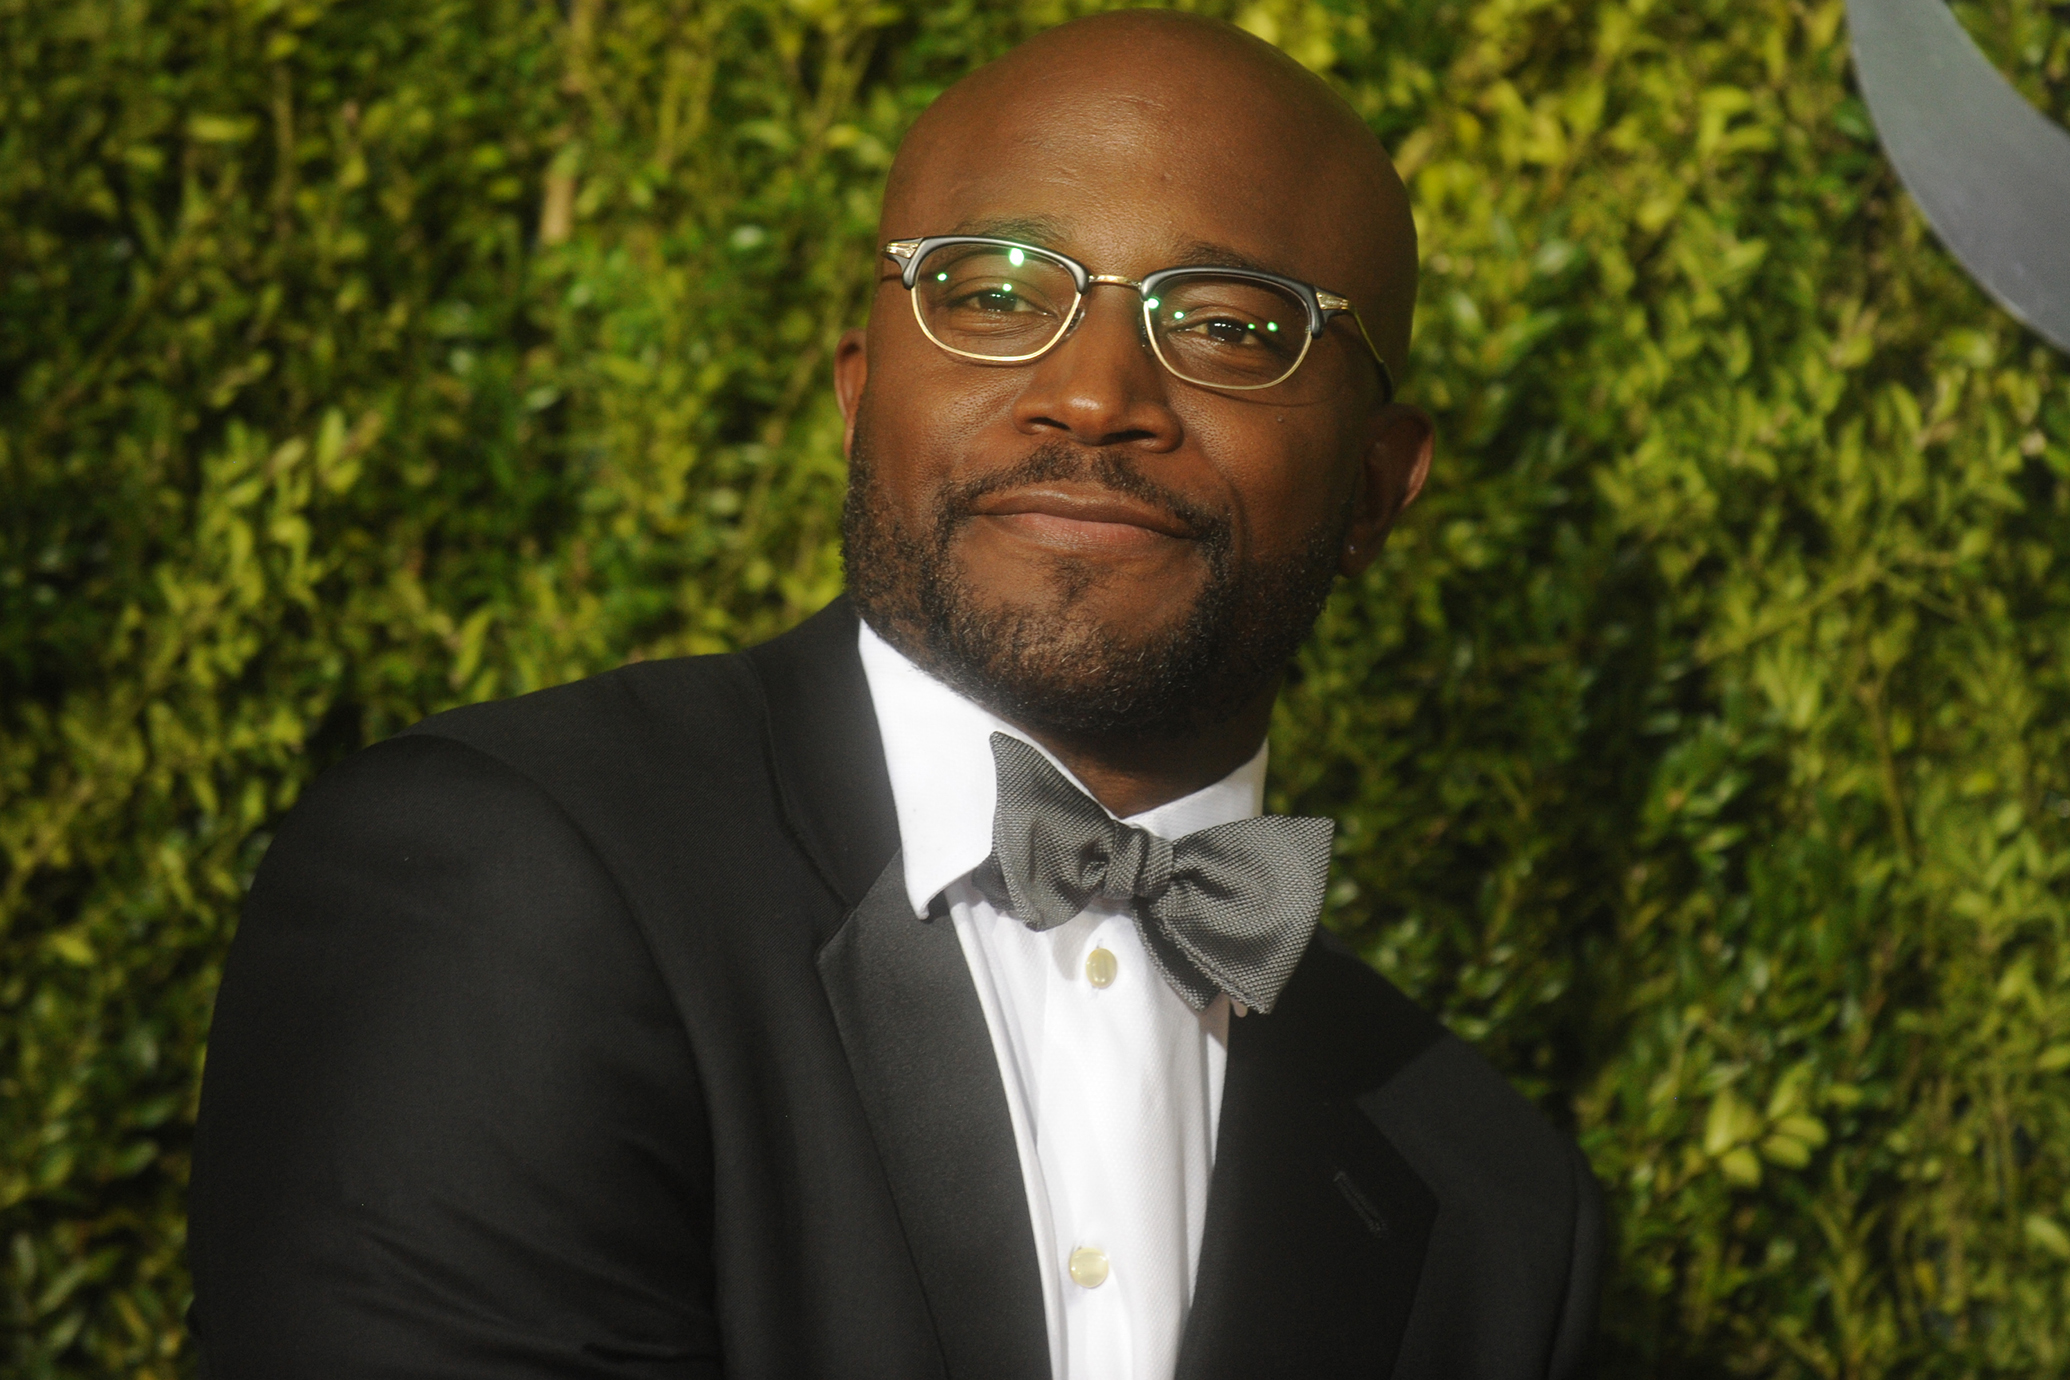 Taye Diggs Cast For "Pivotal, Musical" Role in NCIS 300th Episode...